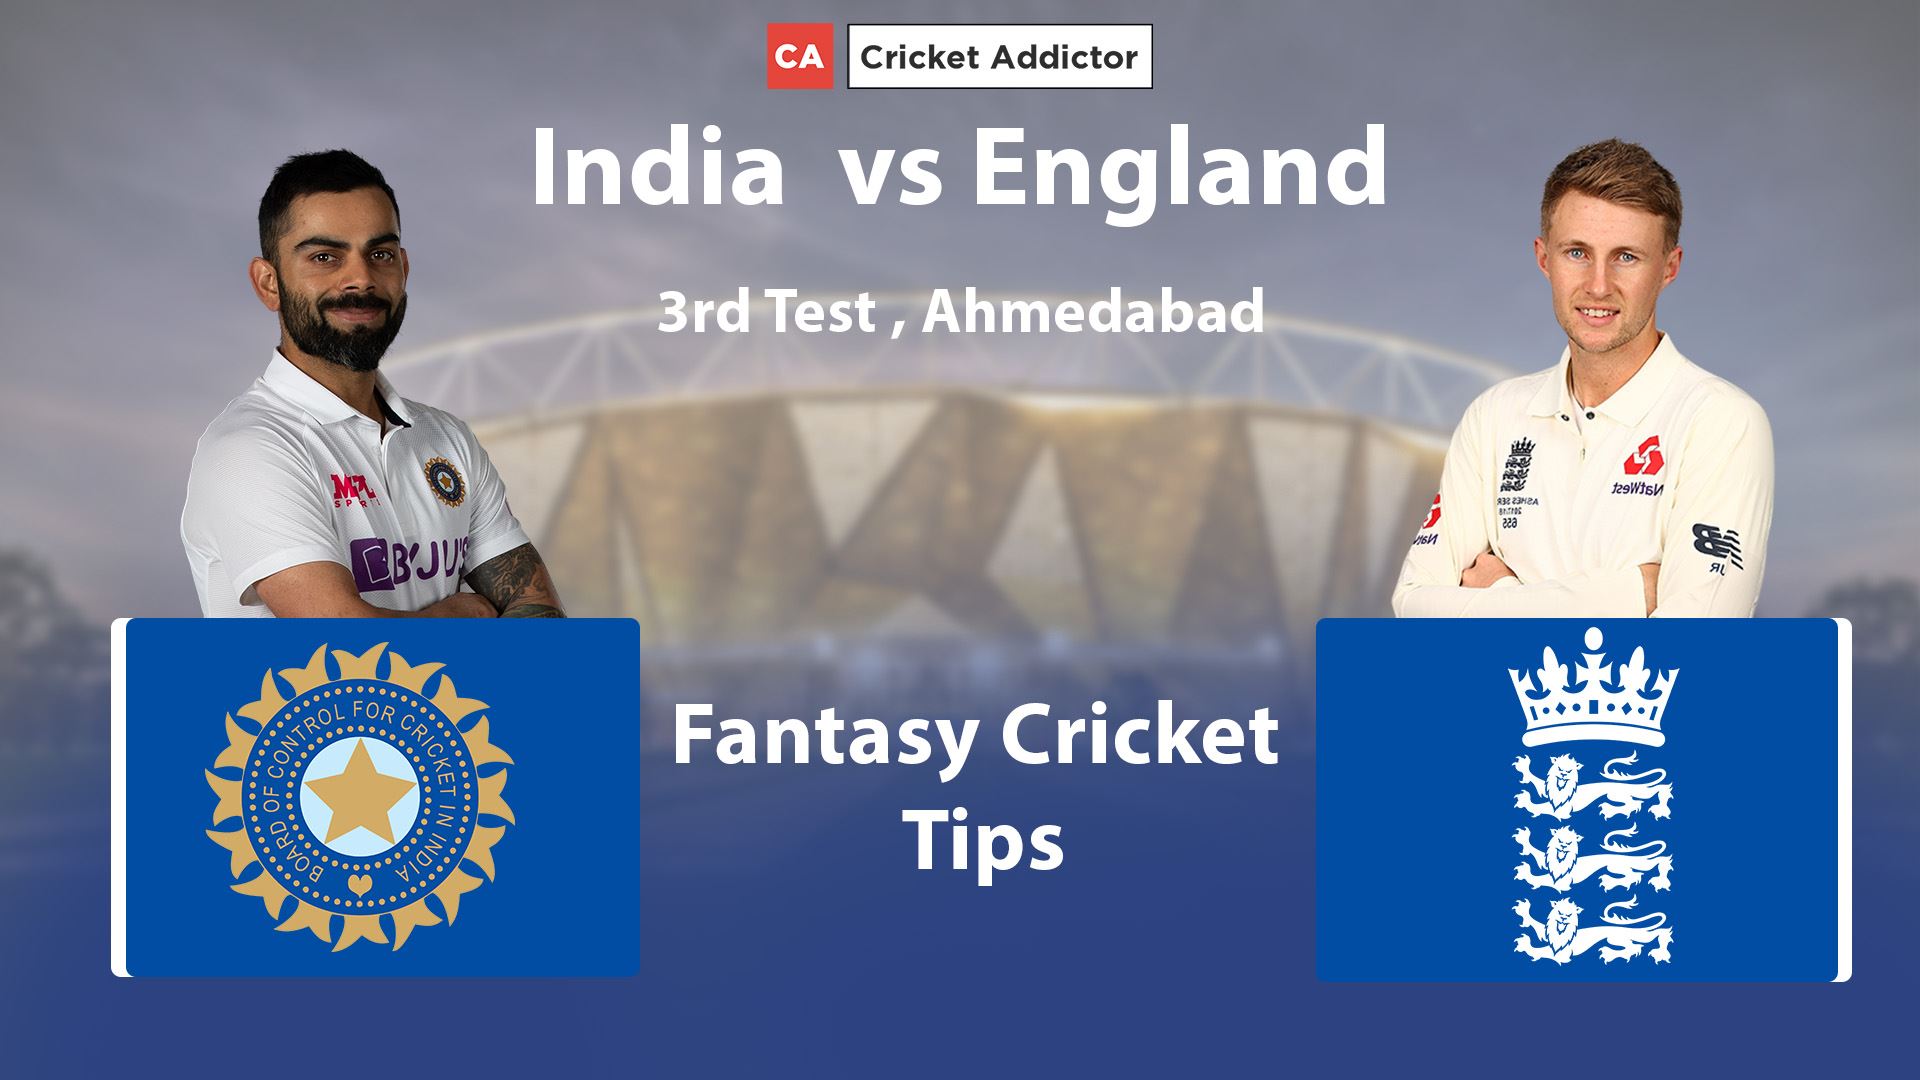 IND vs ENG 3rd Test Dream11 Prediction, Fantasy Cricket Tips, Playing XI, Pitch Report, Dream11 Team, Injury Update – England's tour of India 2021